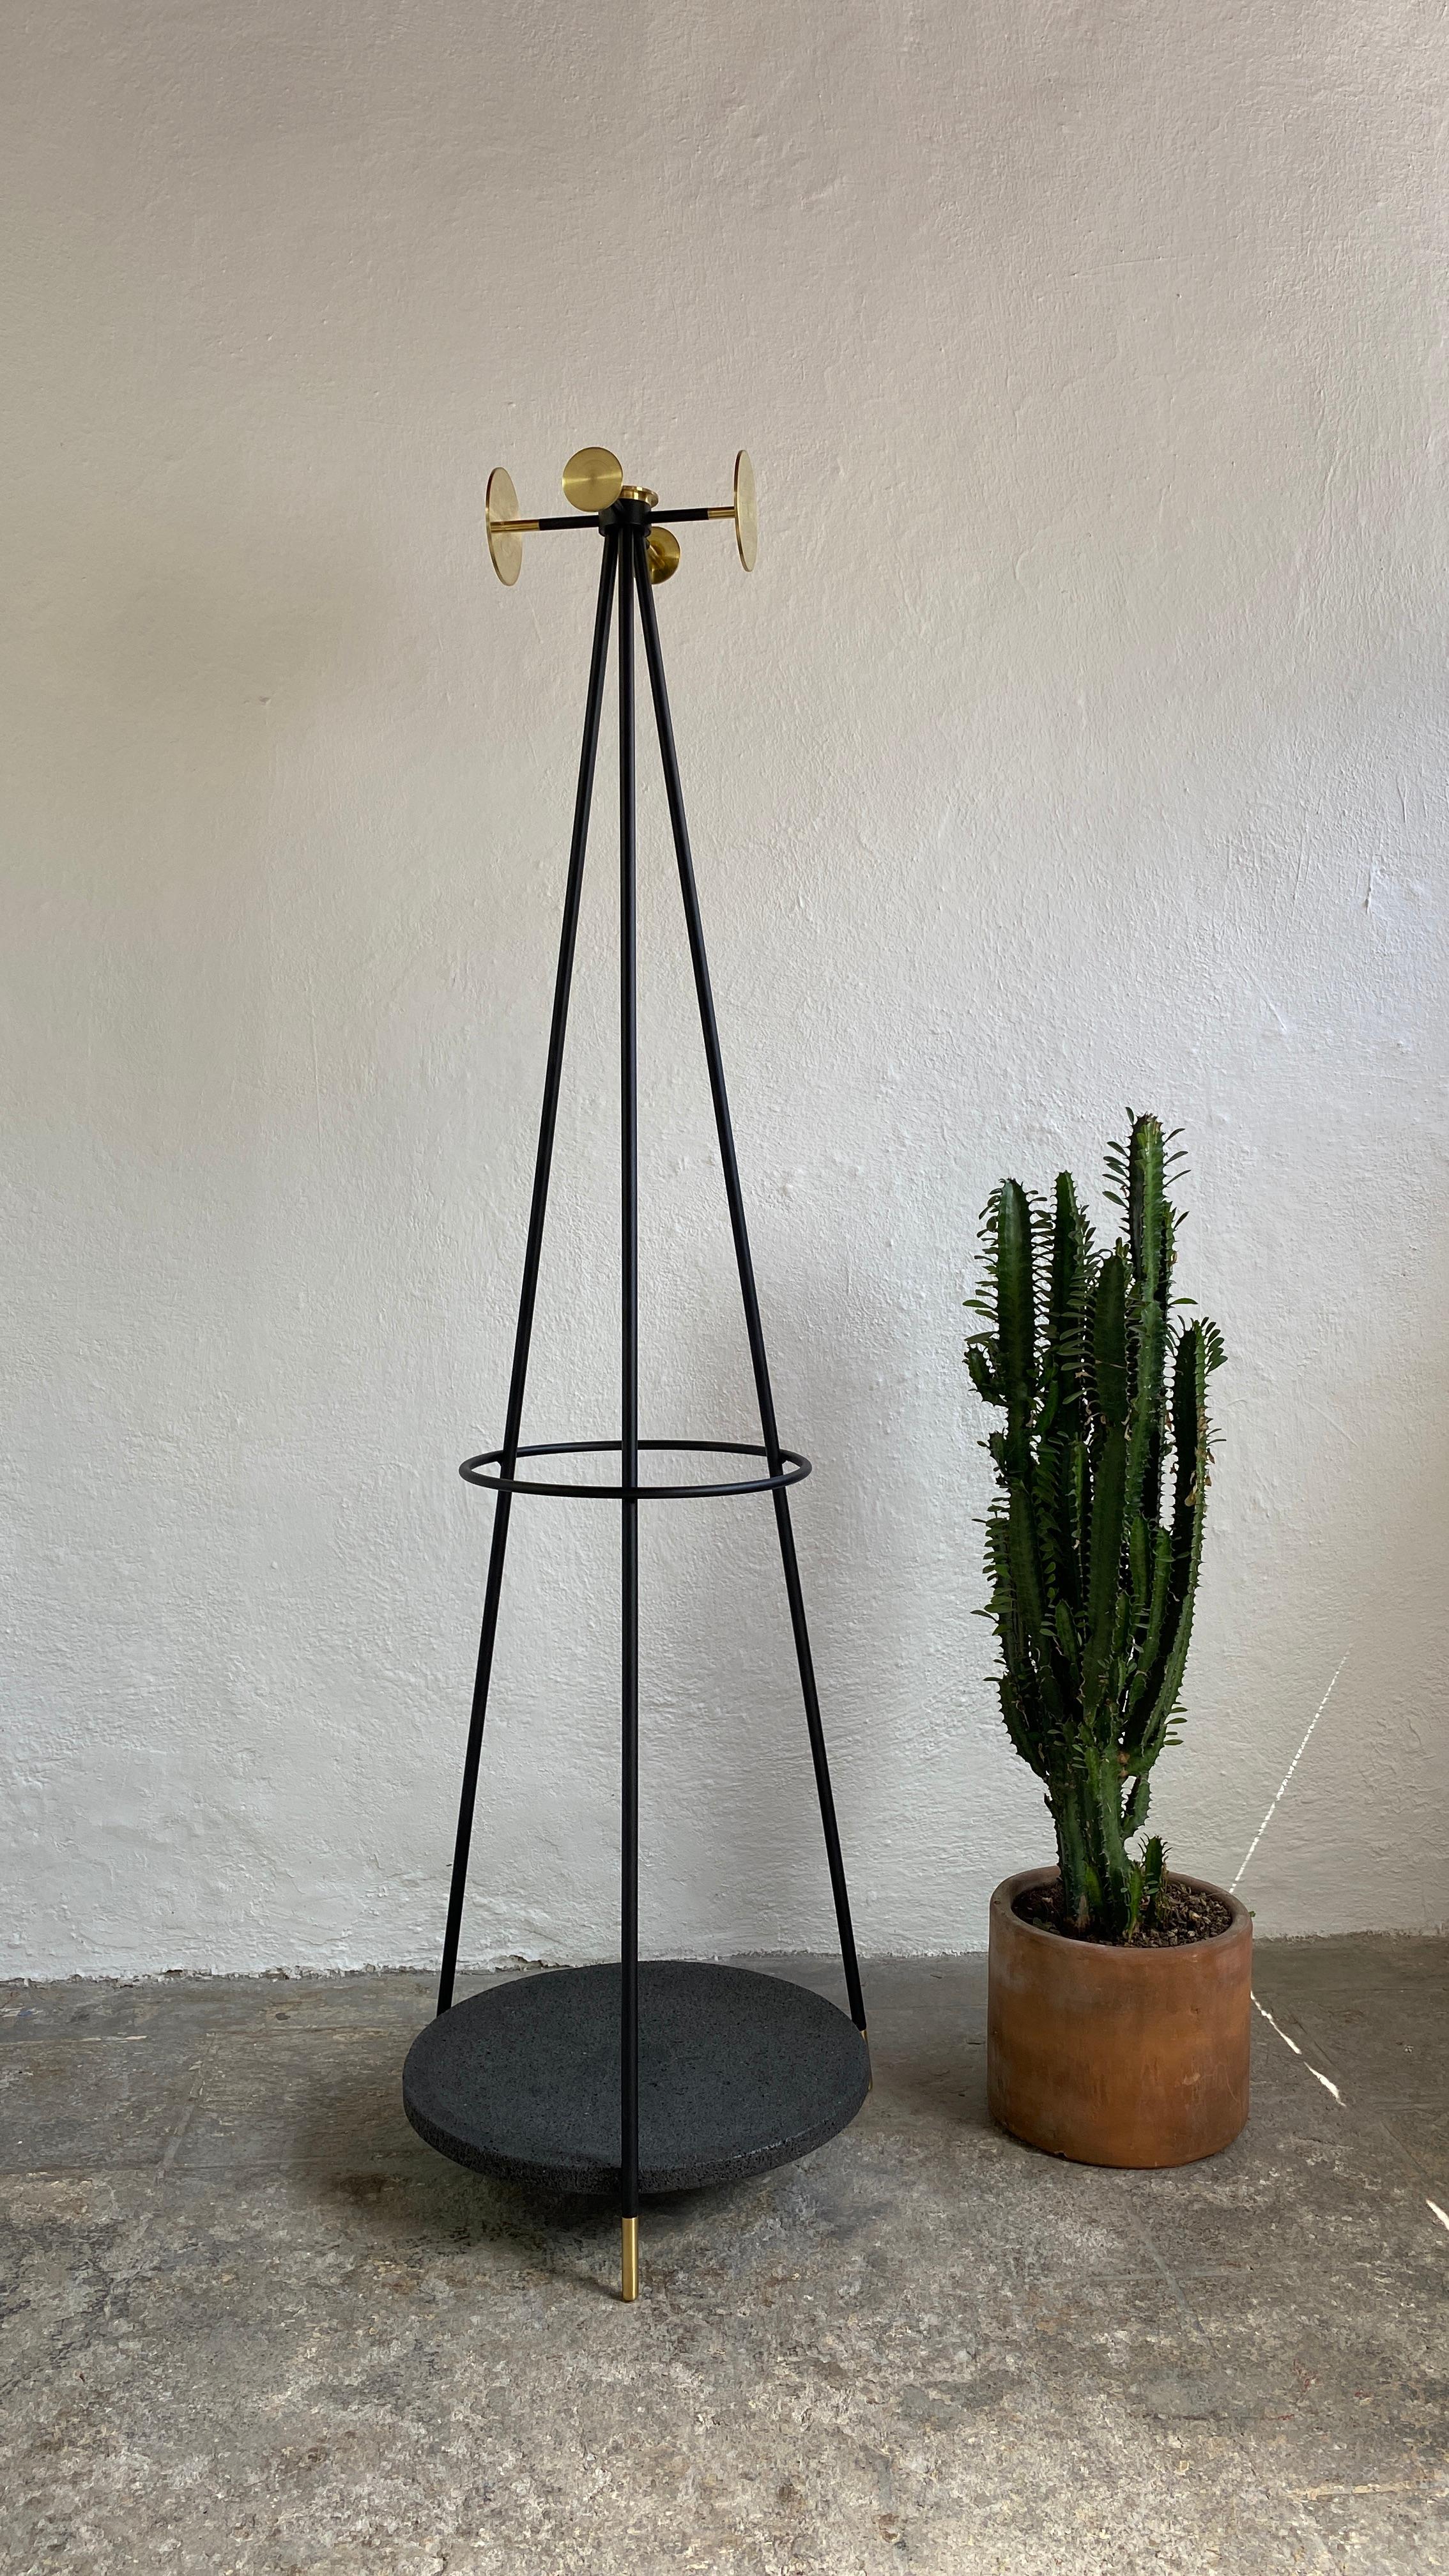 Contemporary Brass Coat and Umbrella Stand by Comité de Proyectos